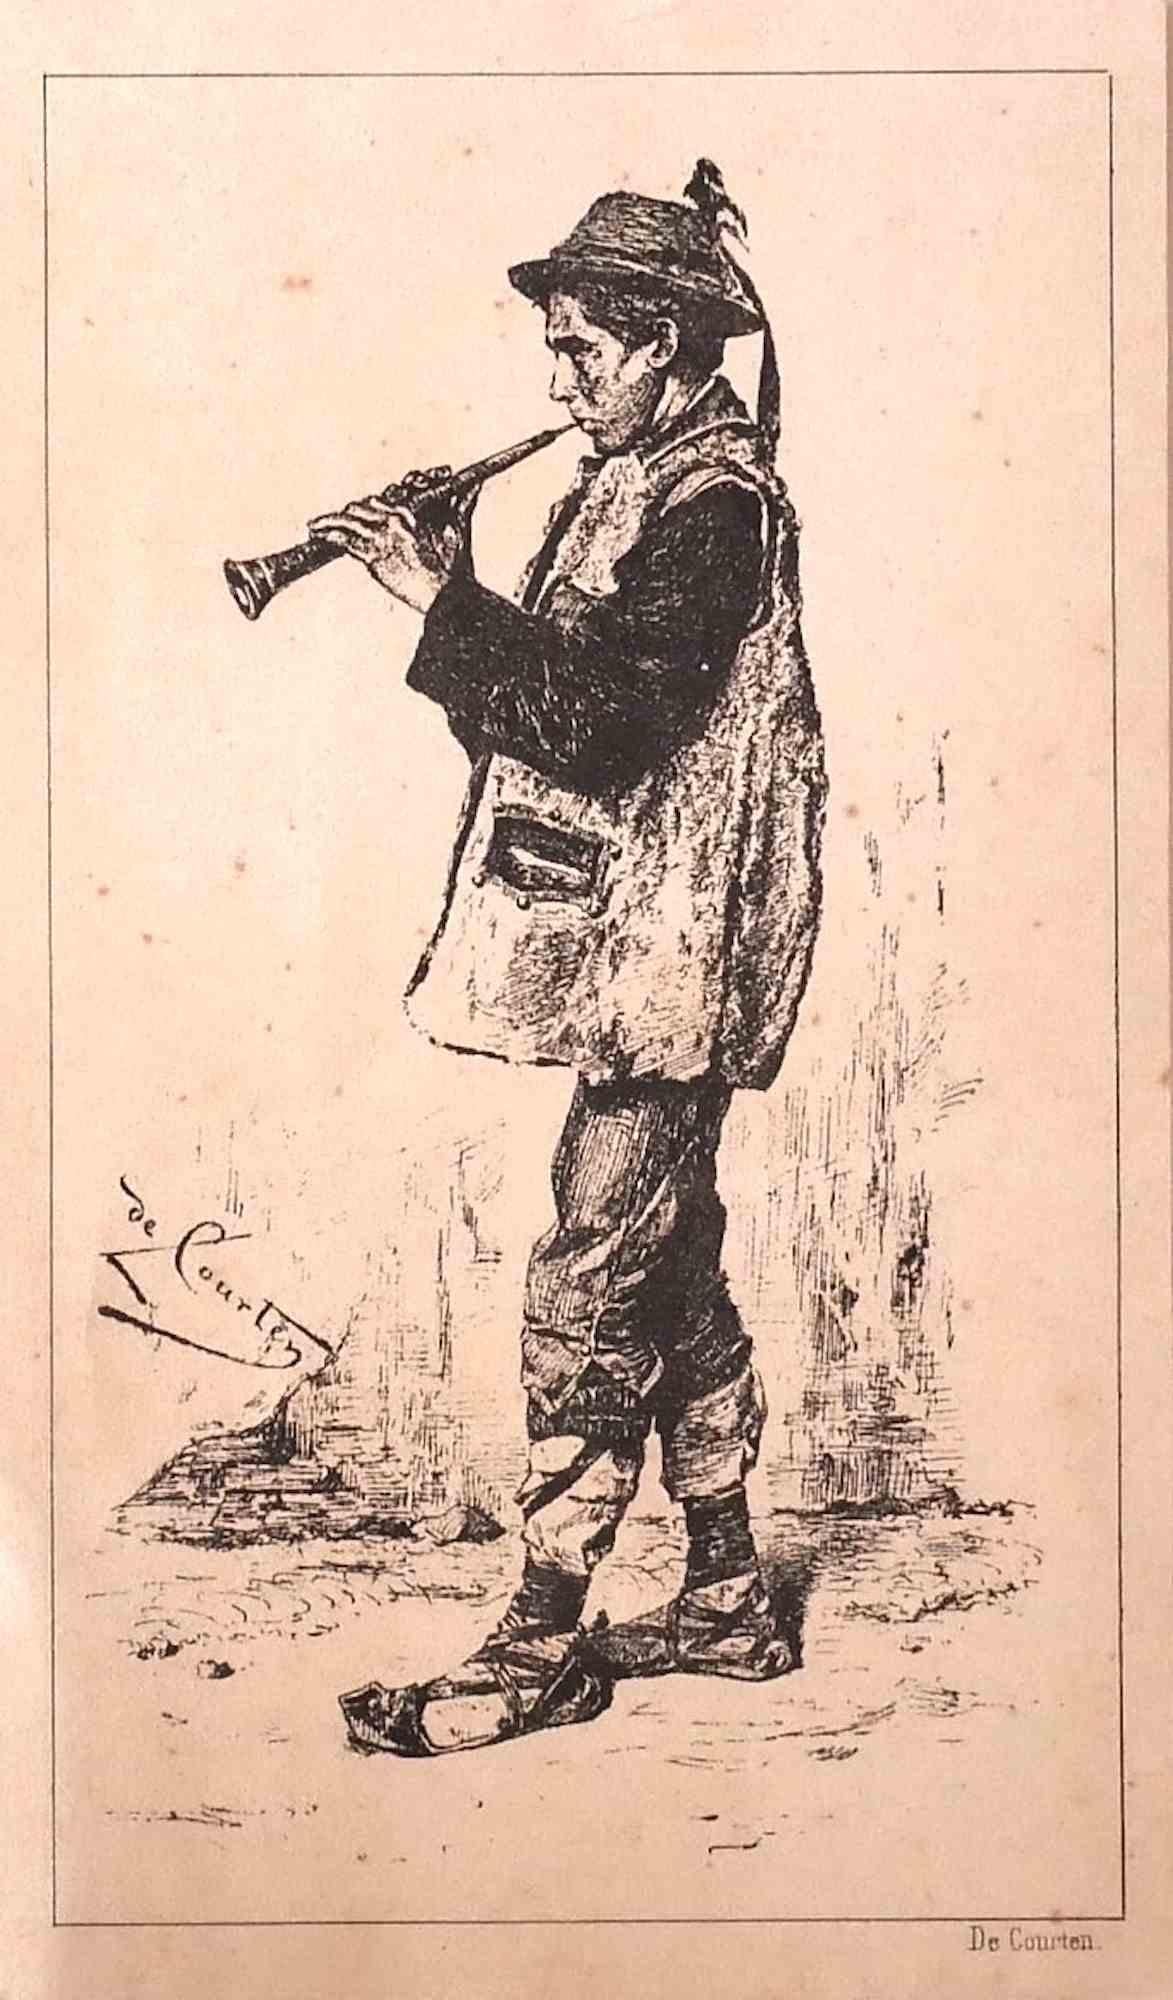 The Musician is an original Lithograph realized in the 19th Century by Angelo De Courten.

Good conditions.

The artwork is depicted through perfect hatching in a well-balanced composition.